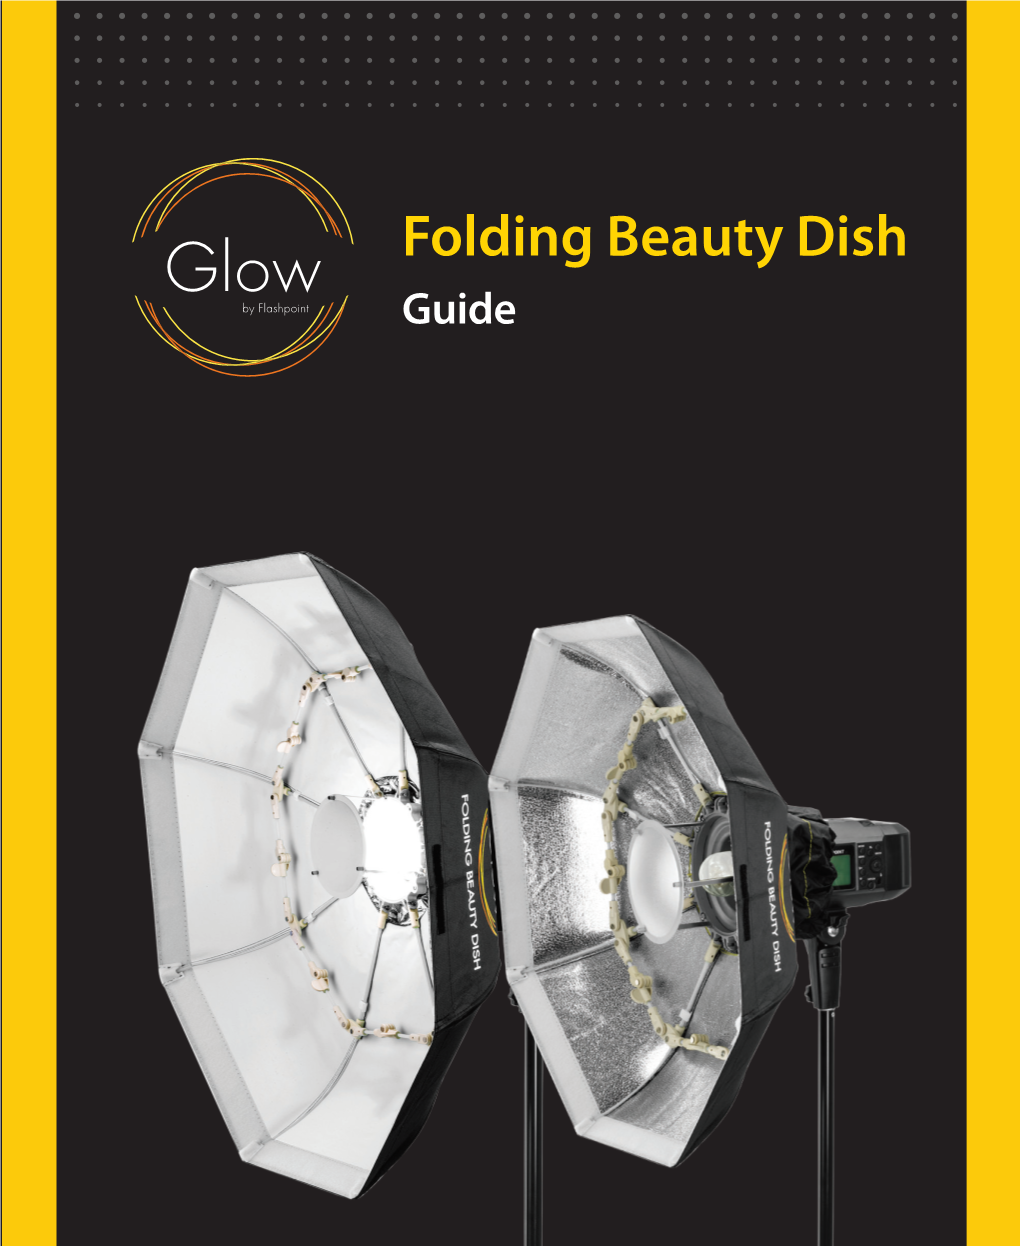 Folding Beauty Dish Guide Introduction